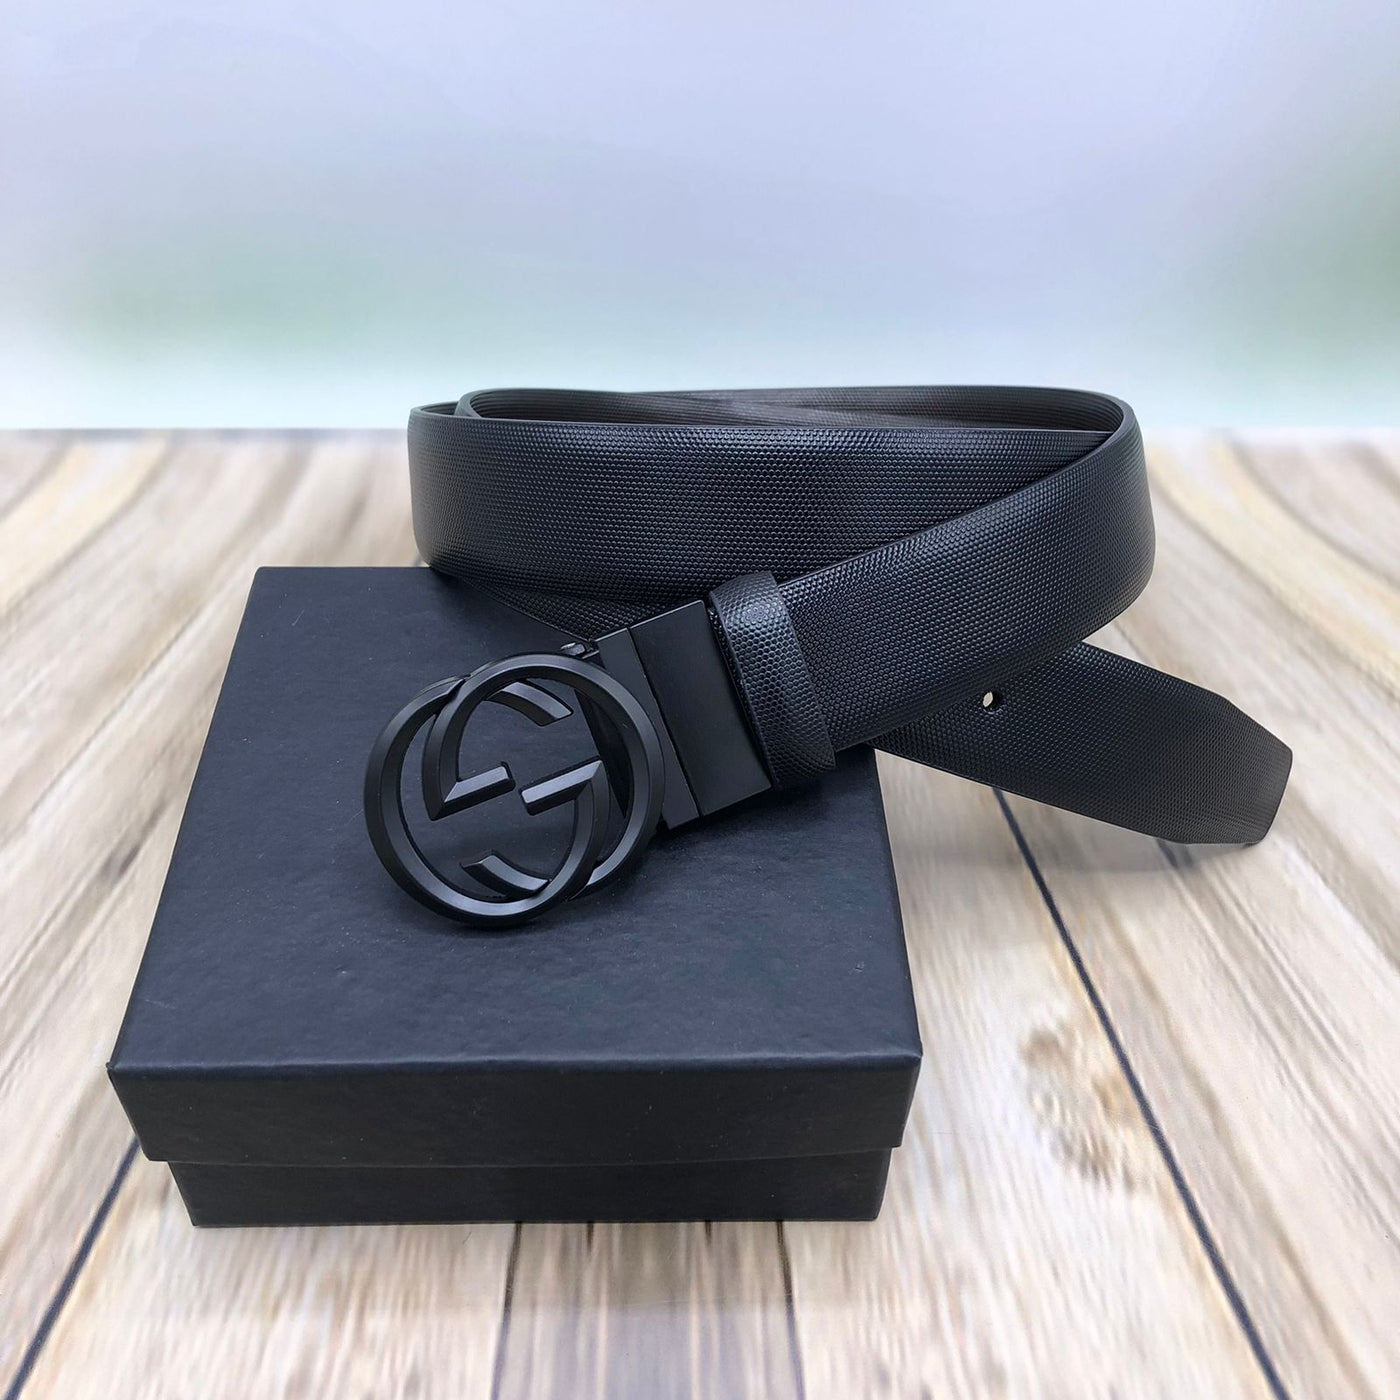 Luxury Designer Belt With GG Pattern For Men's-Unique and Classy